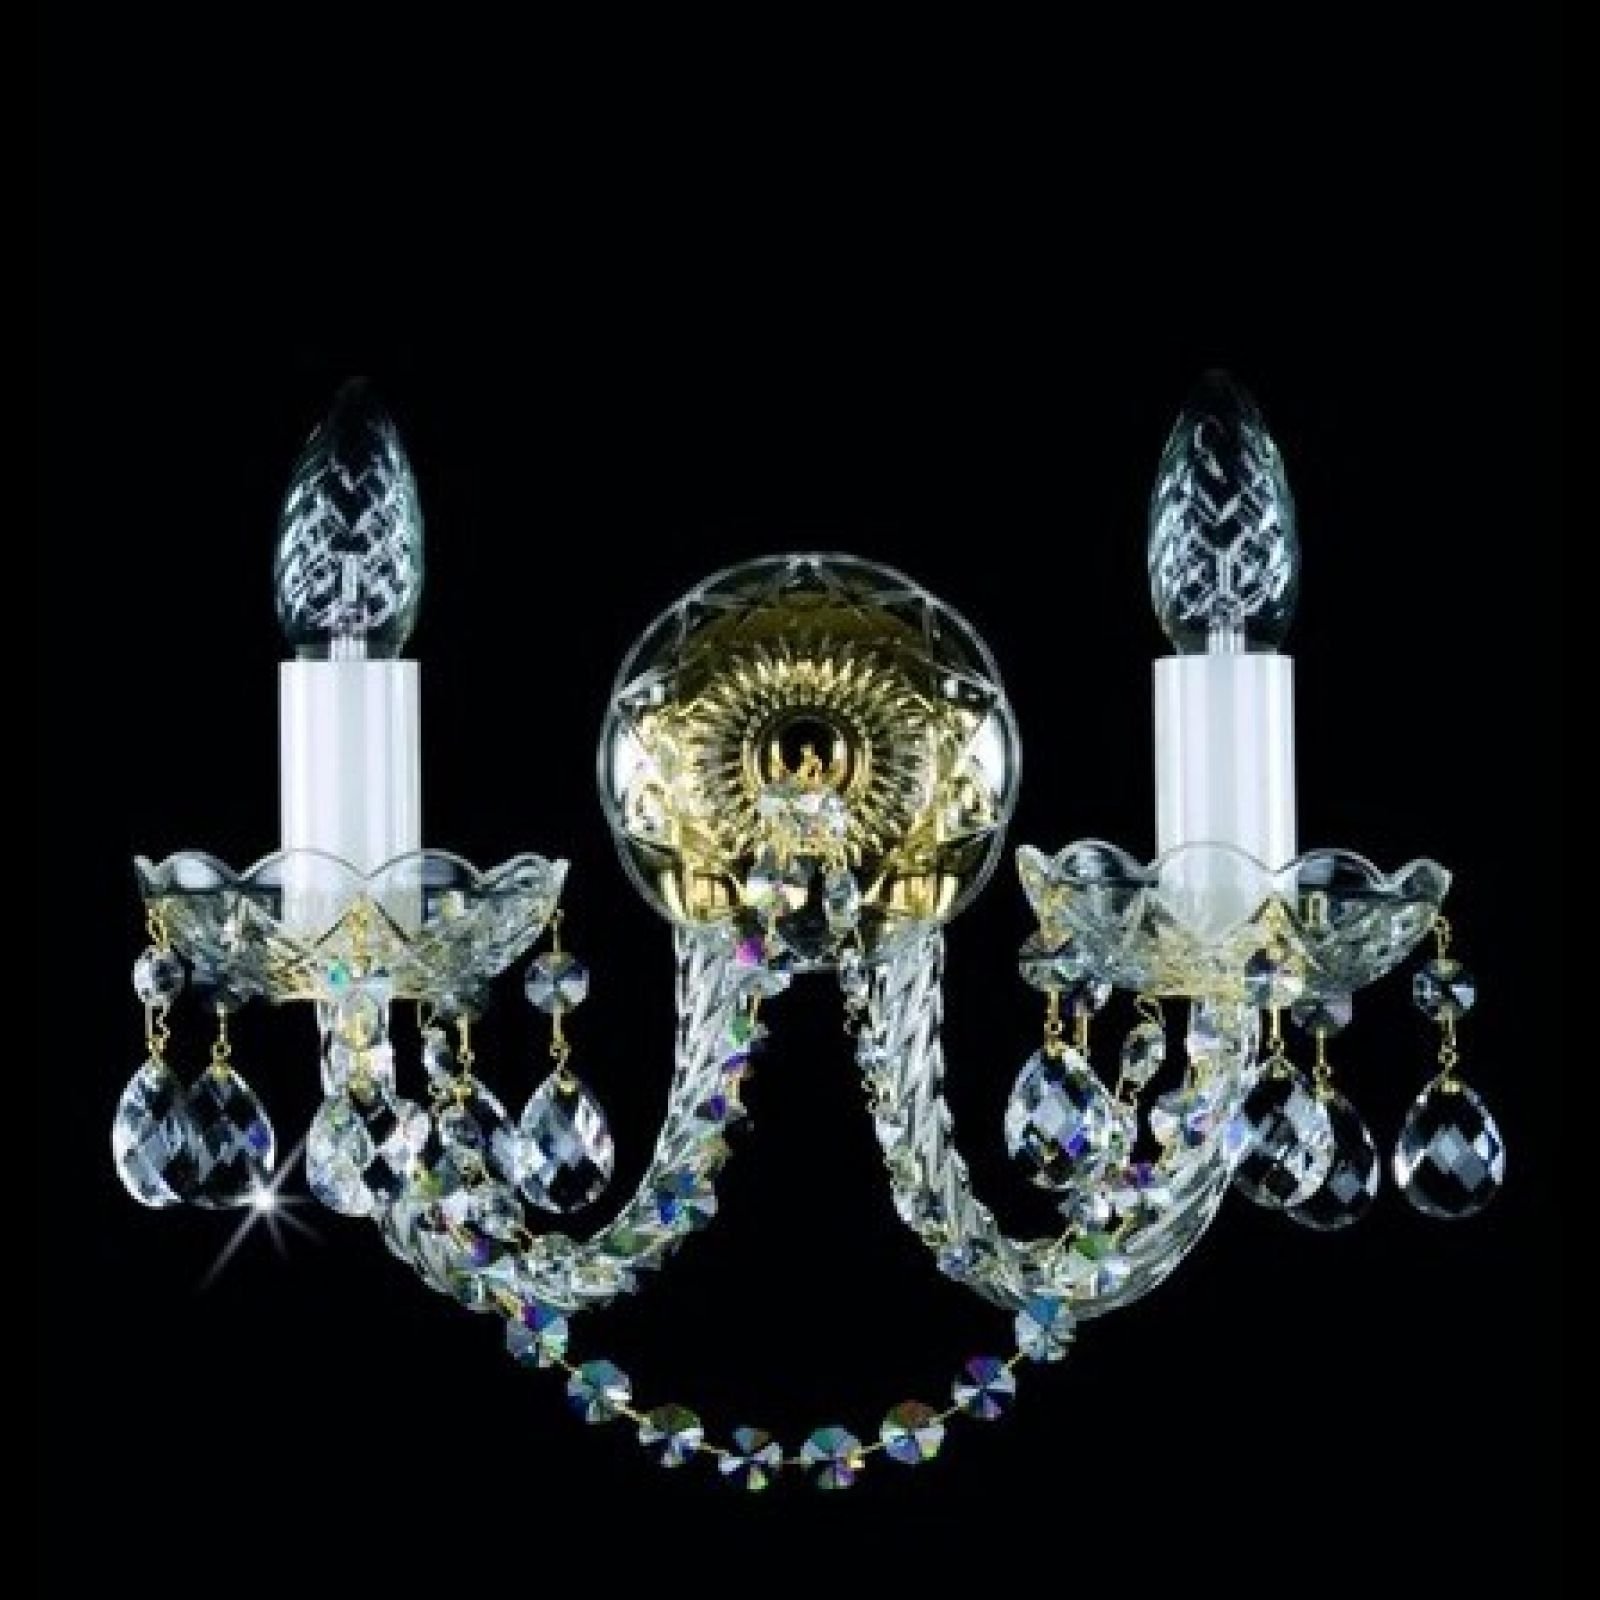 Two arm classic crystal wall sconce